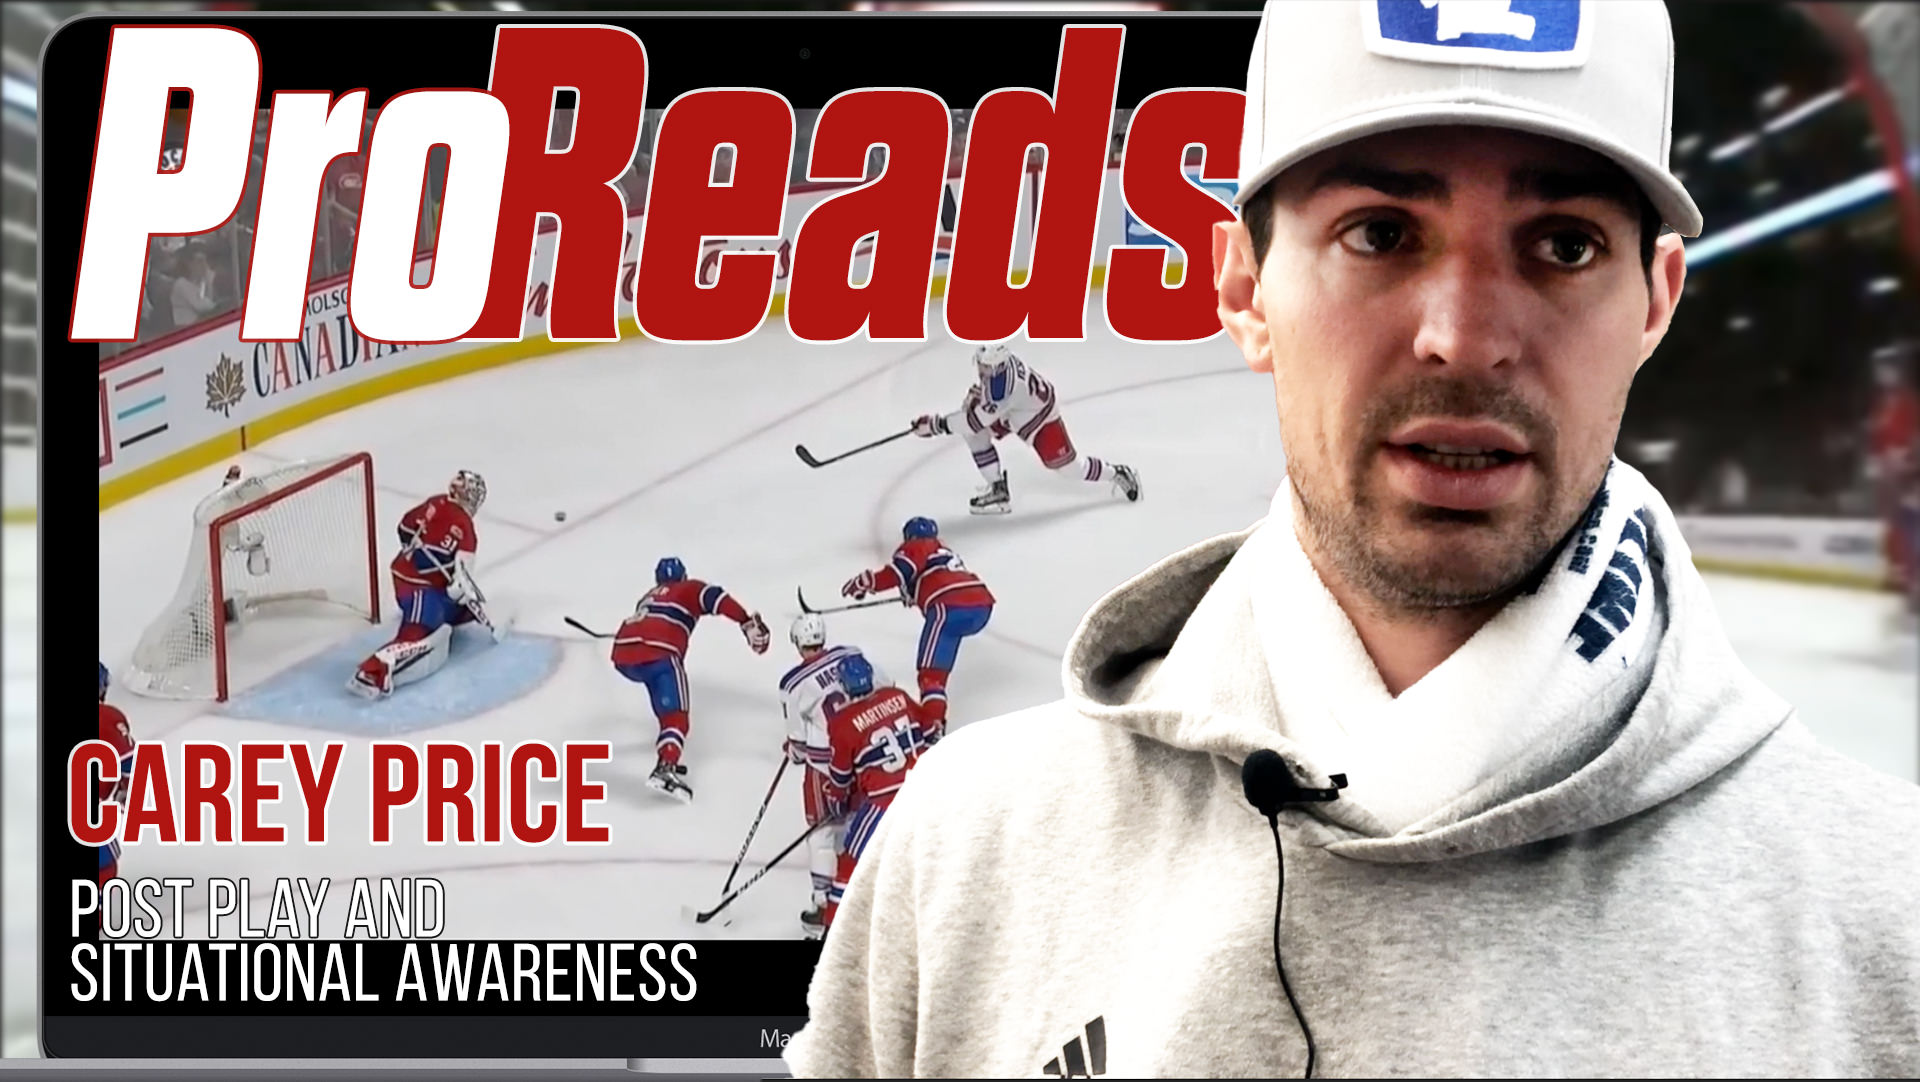 Pro-Reads: Carey Price- Situational Awareness and Compete in a “fire drill”